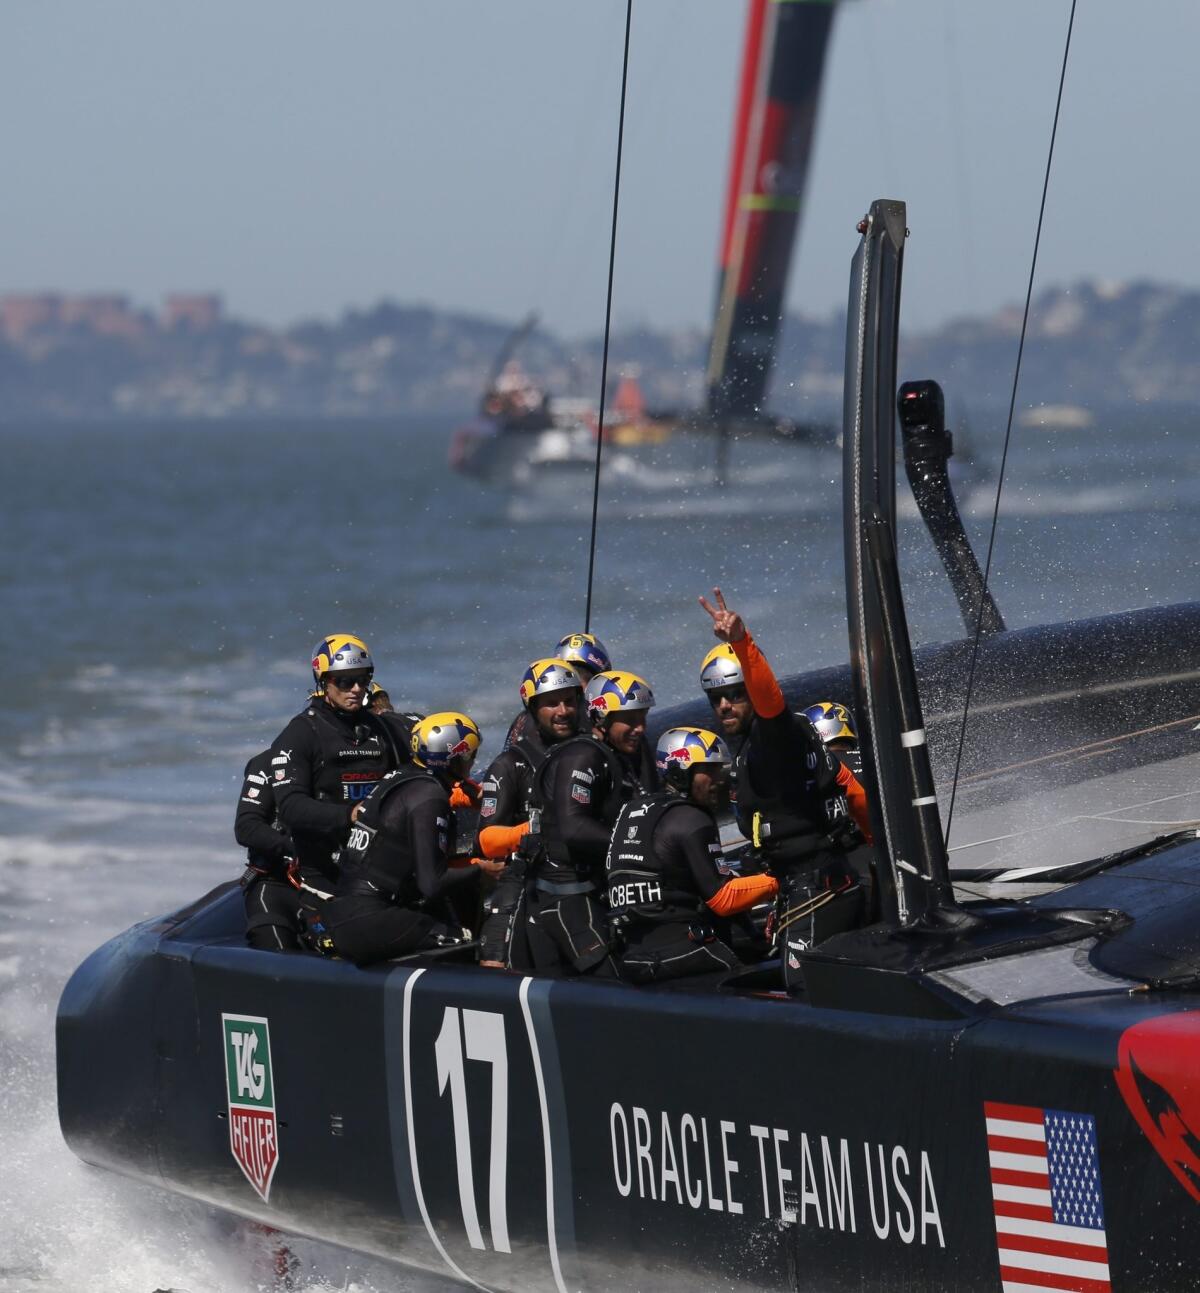 Oracle Team USA crosses the finish line to win Race 16 of the America's Cup in San Francisco Bay on Monday.